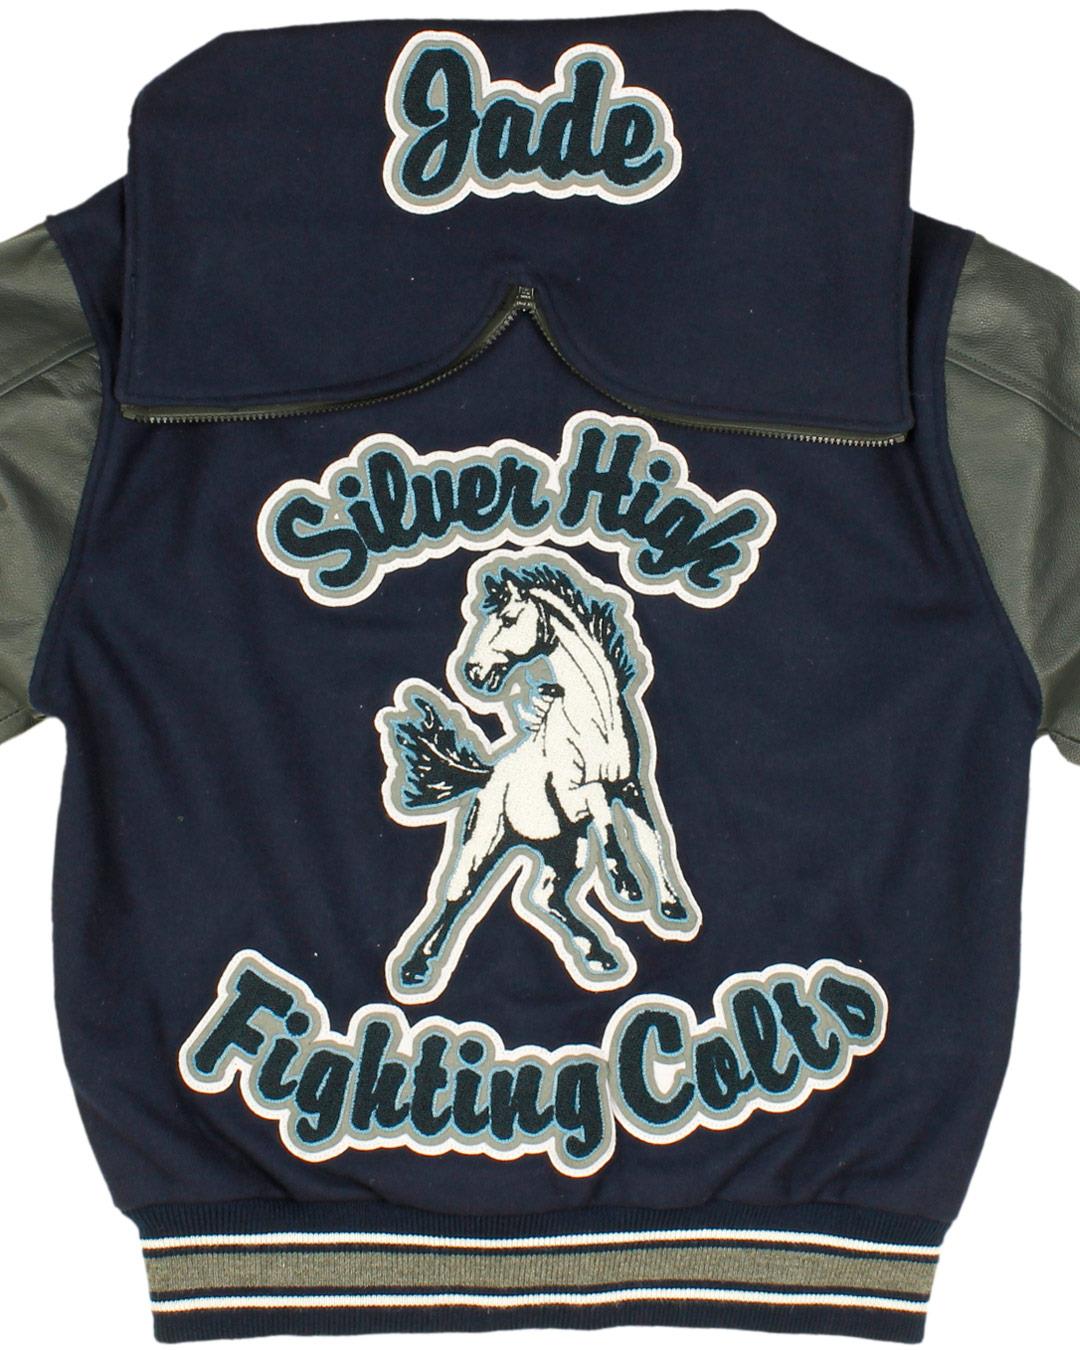 Silver High School Fighting Colts Letter Jacket, Silver City NM - Back